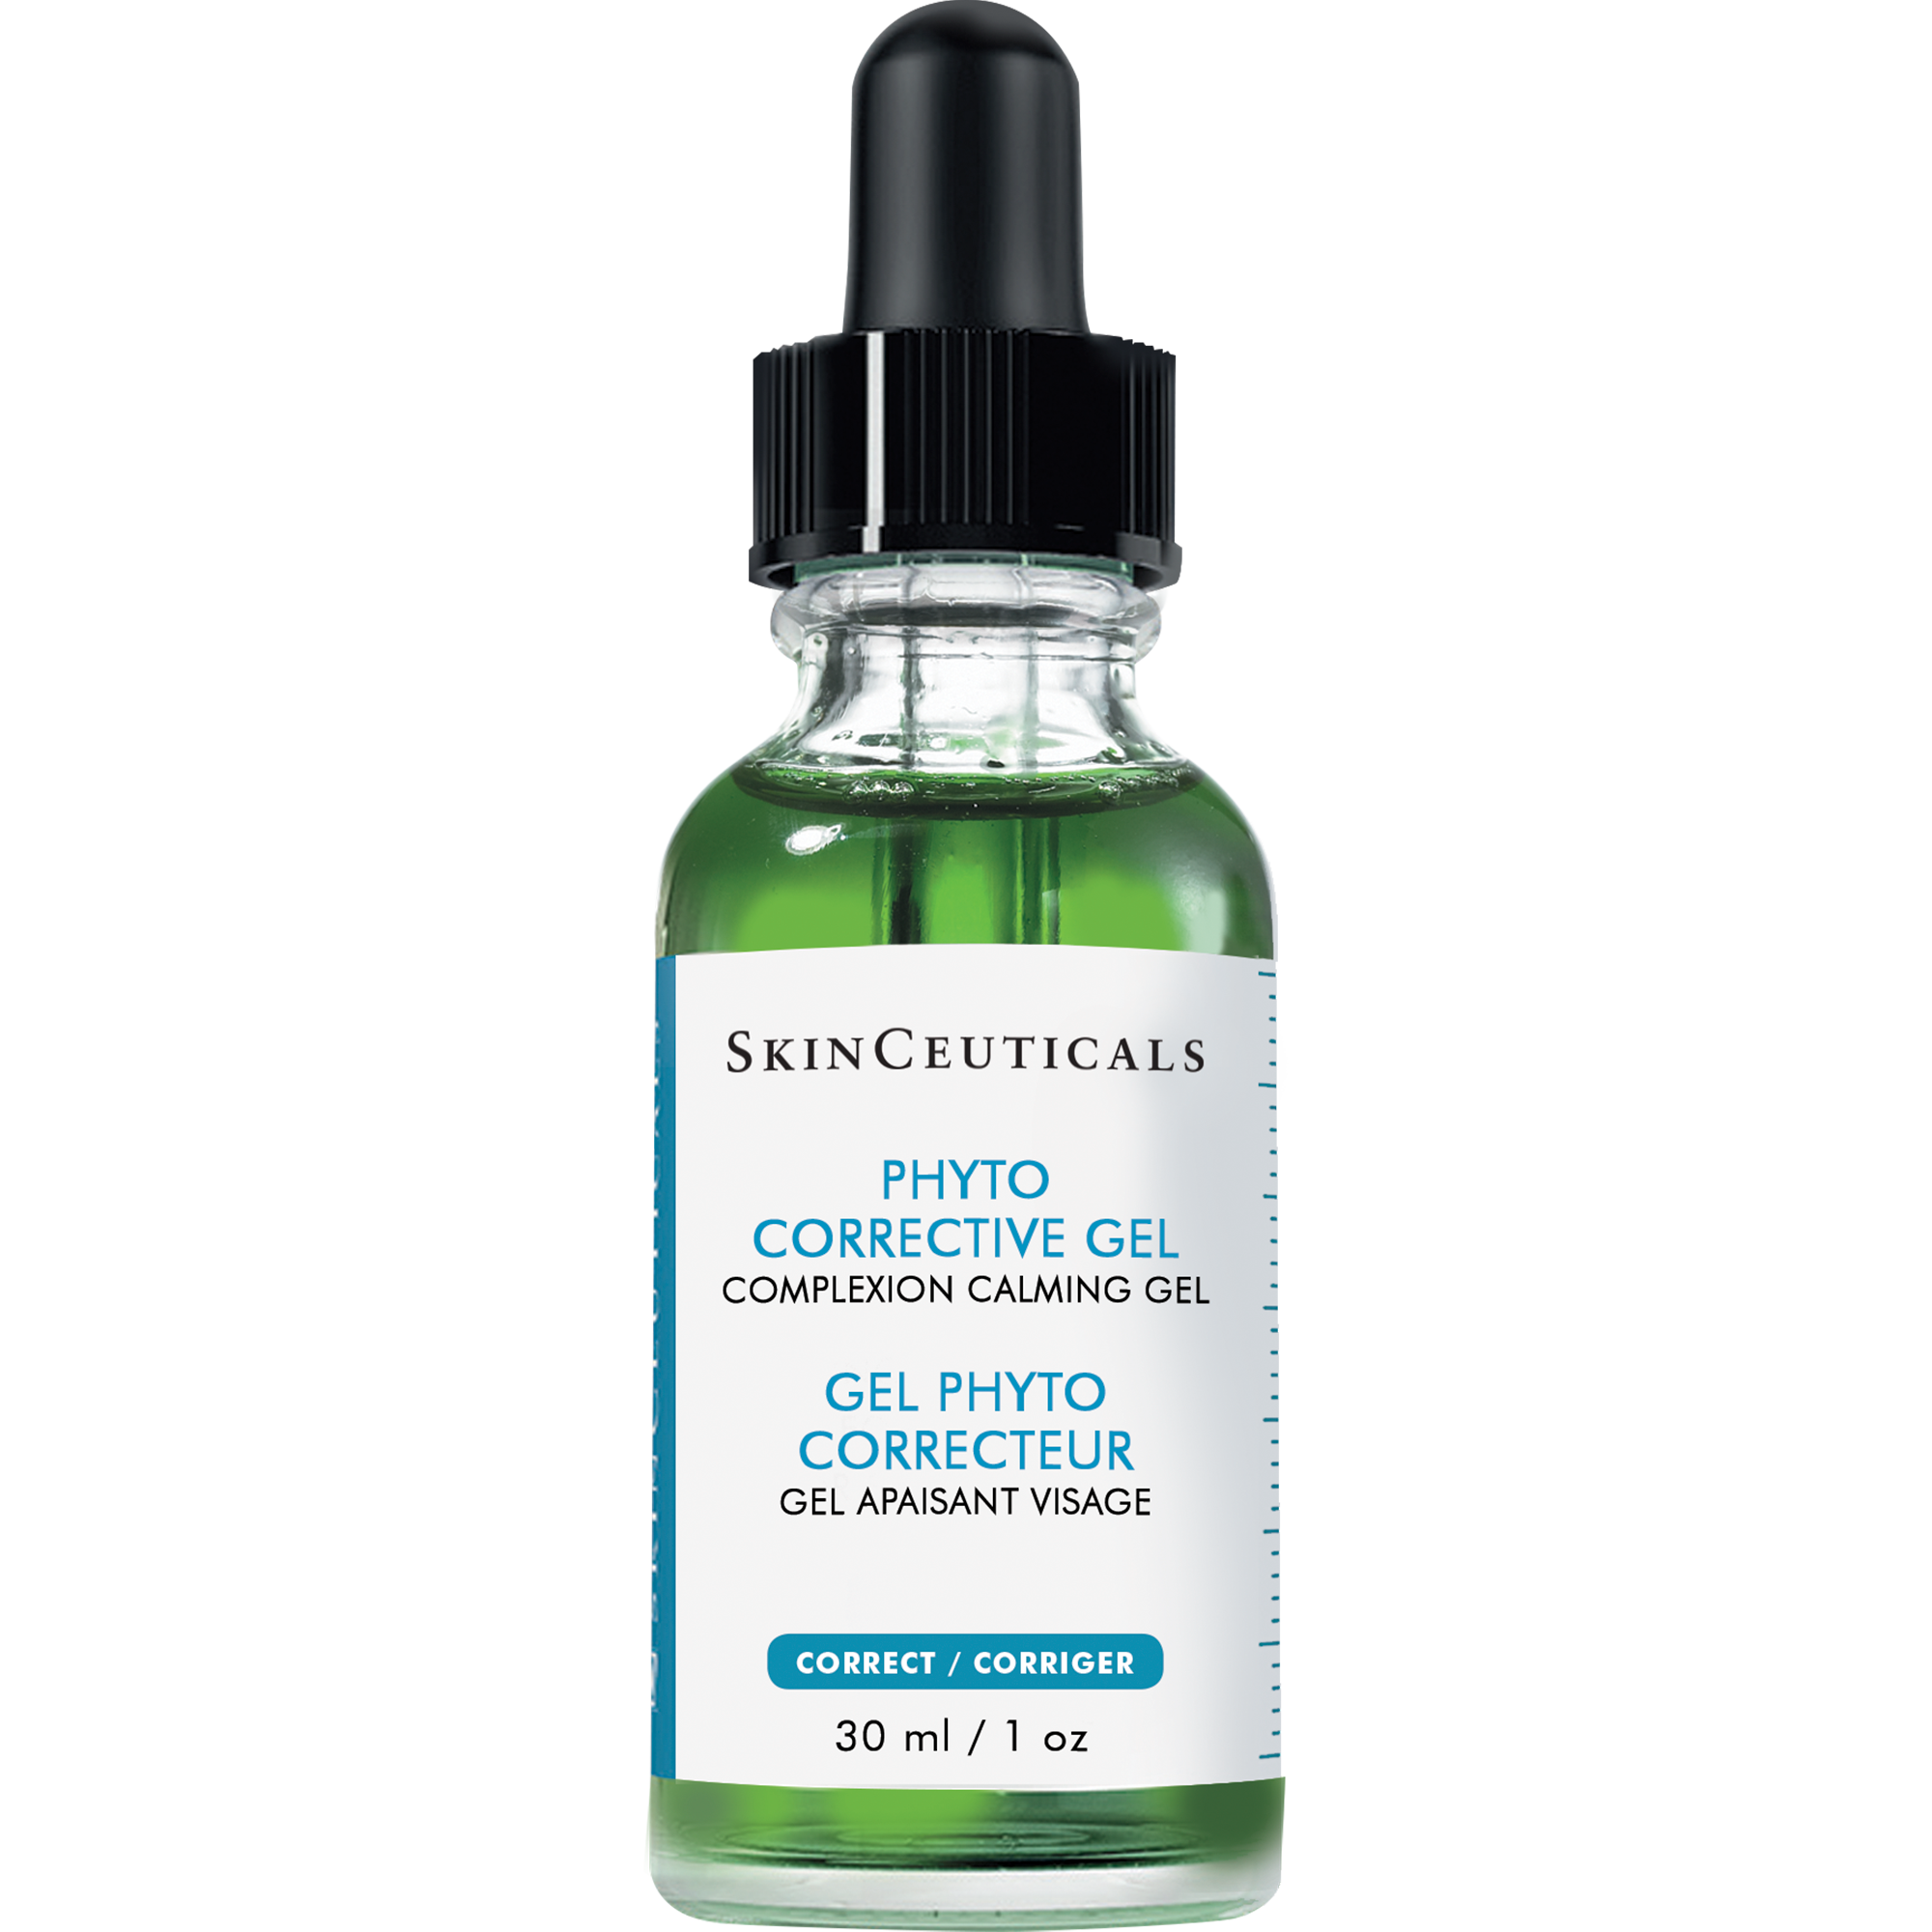 Phyto Corrective Gel .png